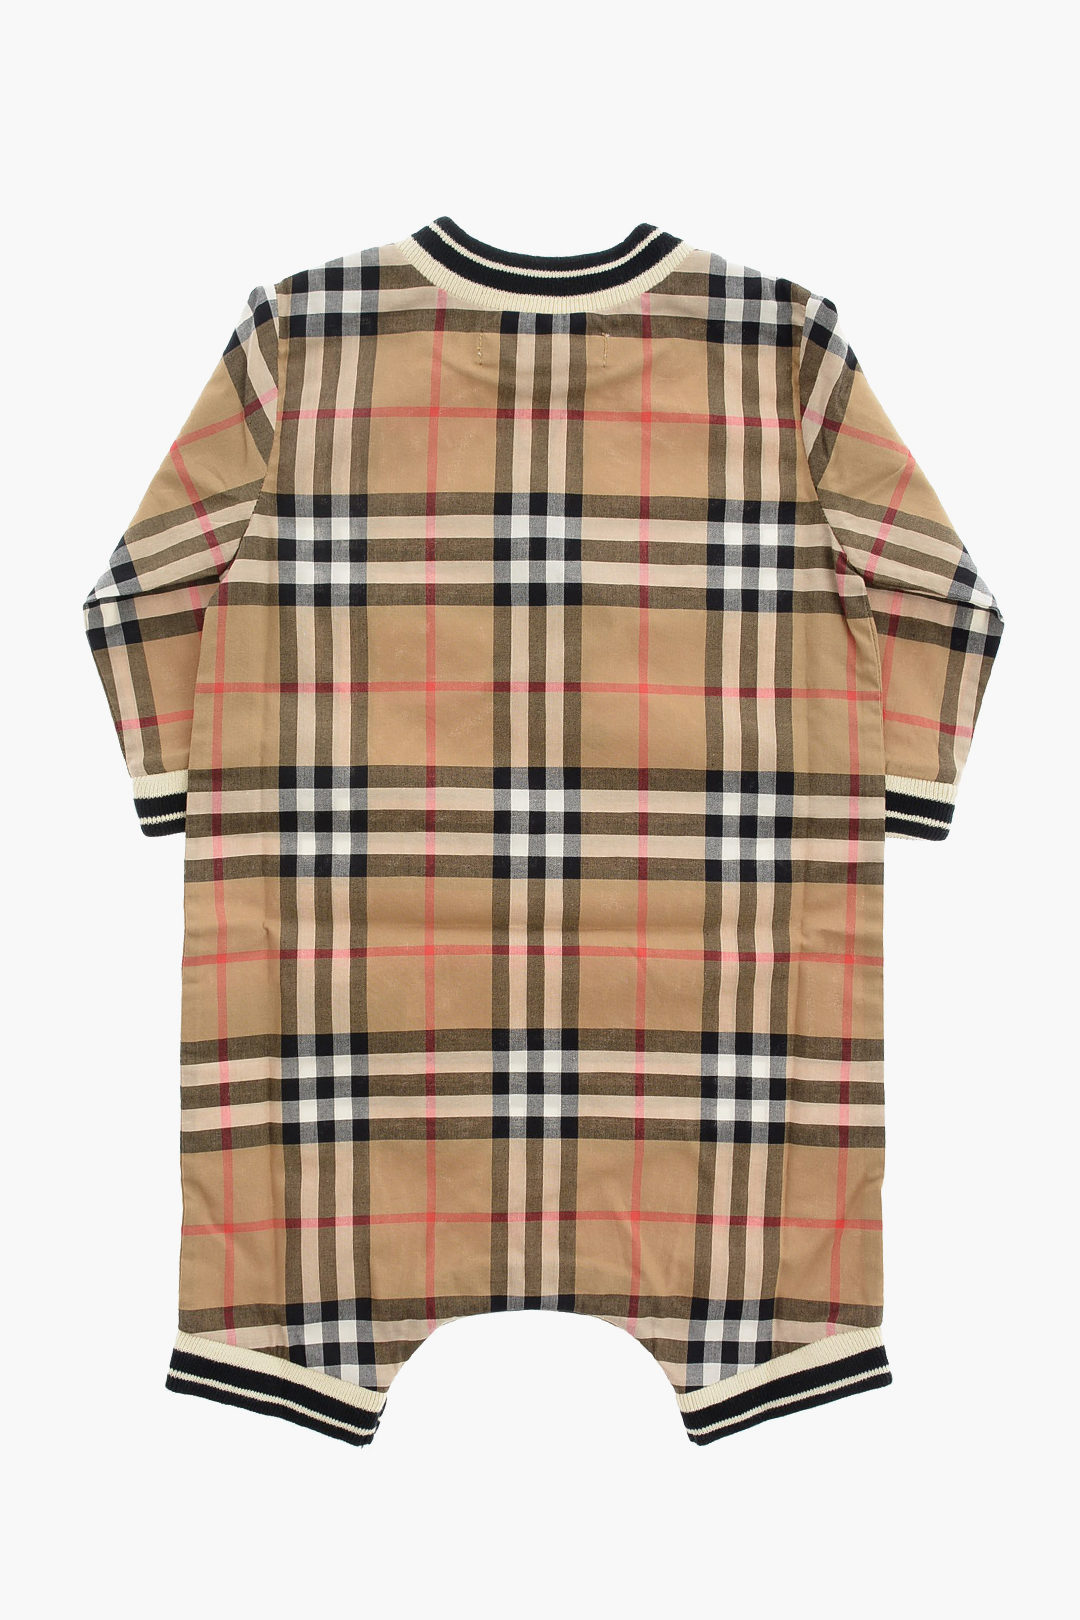 Burberry KIDS Checked MICHAEL romper suit boys - Glamood Outlet